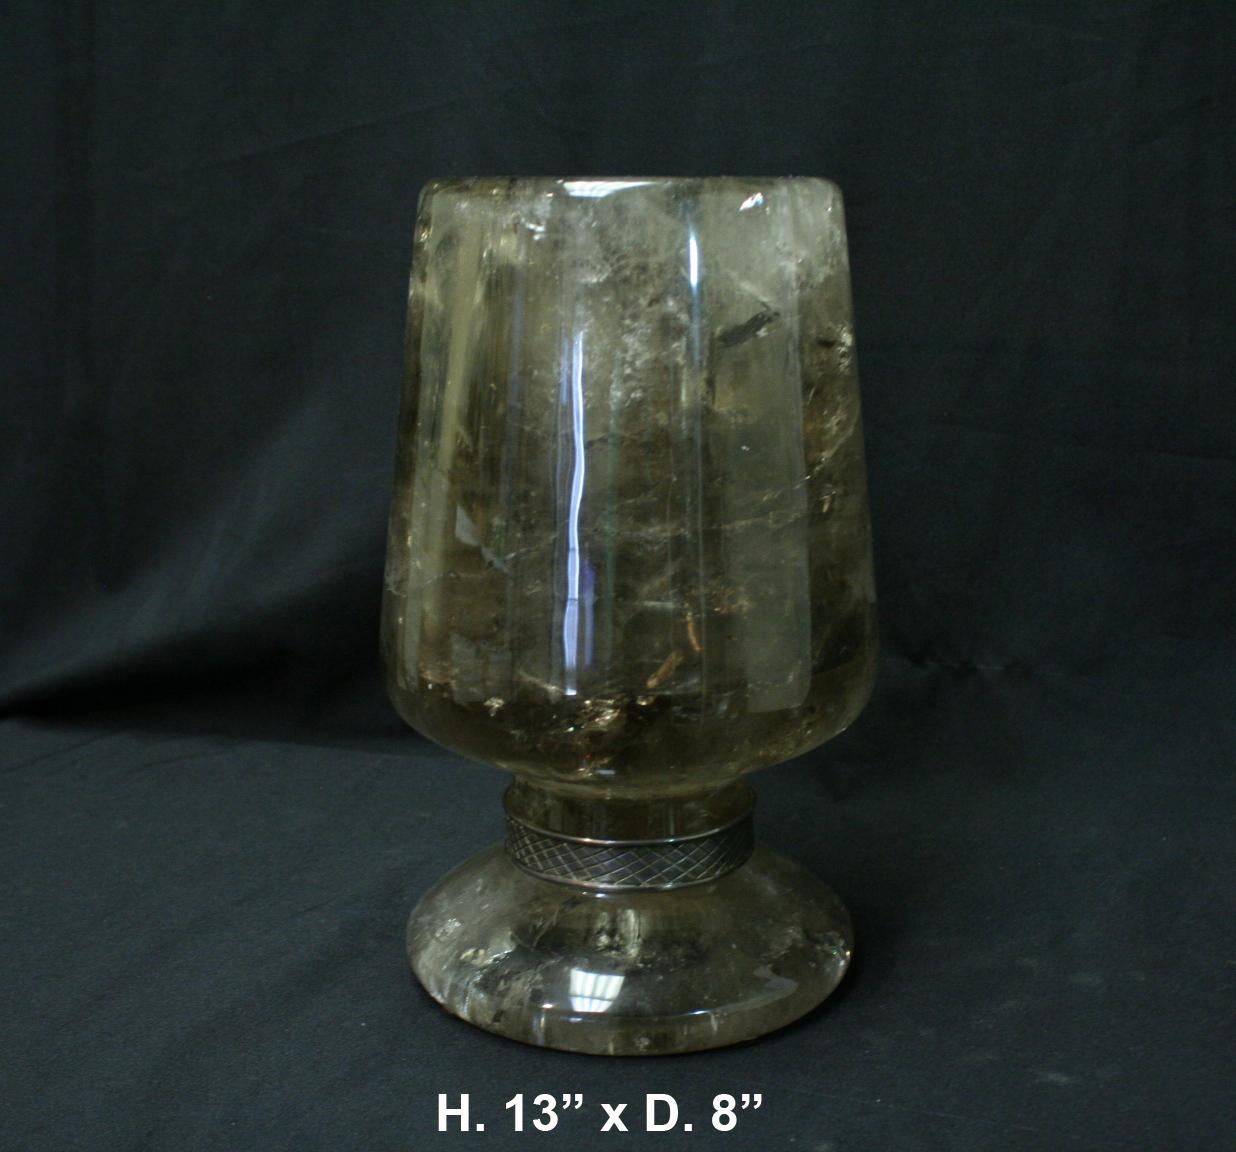 Spectacular one of a kind large hand carved and hand polished smokey rock crystal urn. 
With decorated brass band around the neck.
This urn can be used as an outstanding centerpiece with flowers. It is very sturdy and heavy.

Free shipping in